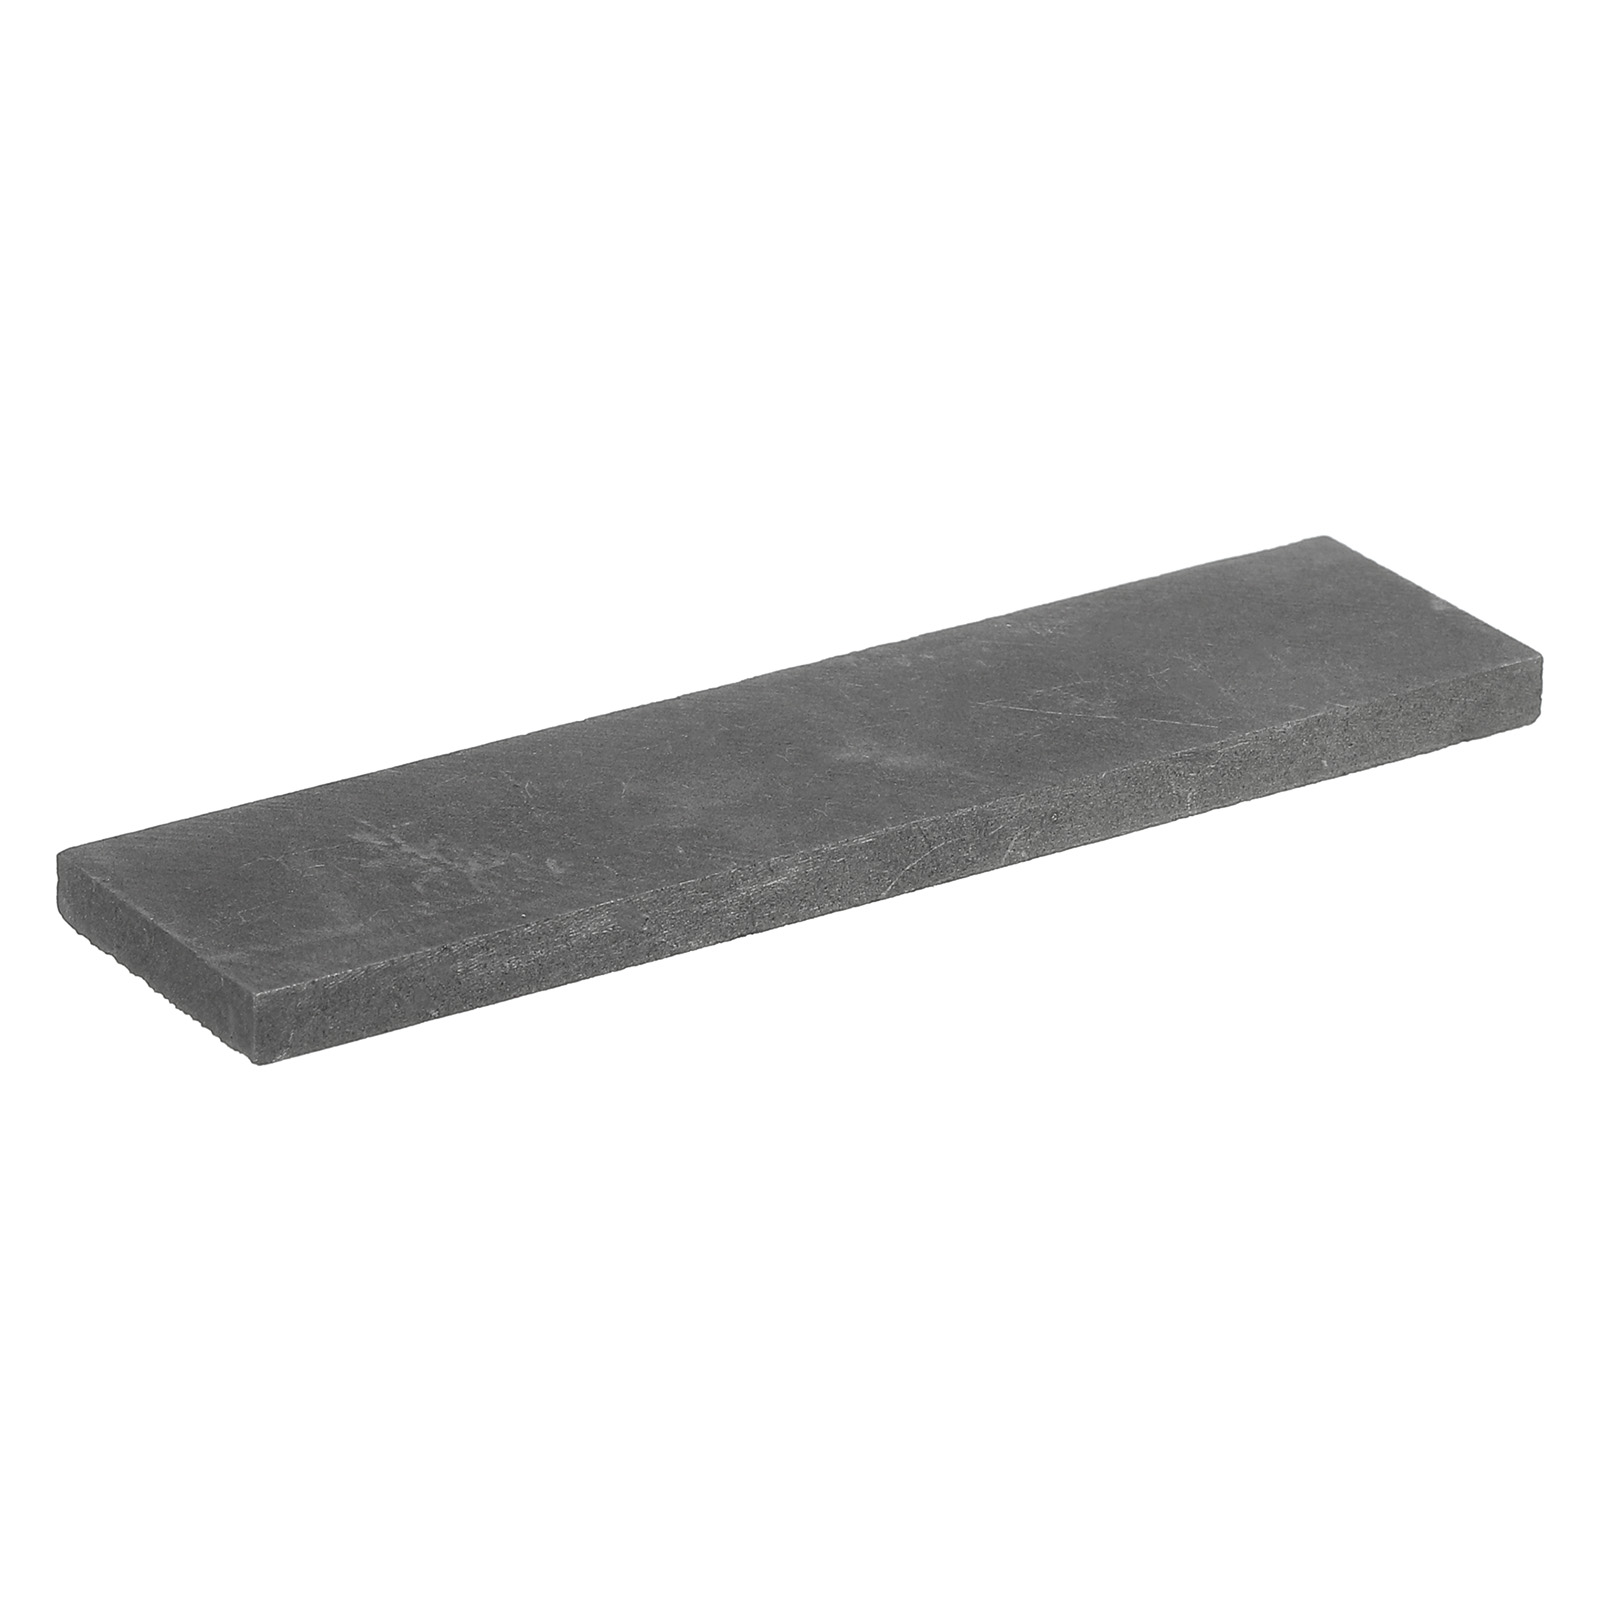 Graphite Block Ingot Rectangle Graphite Electrode Plate 100x25x5mm for  Melting Casting, Electrolysis, Pack of 3 